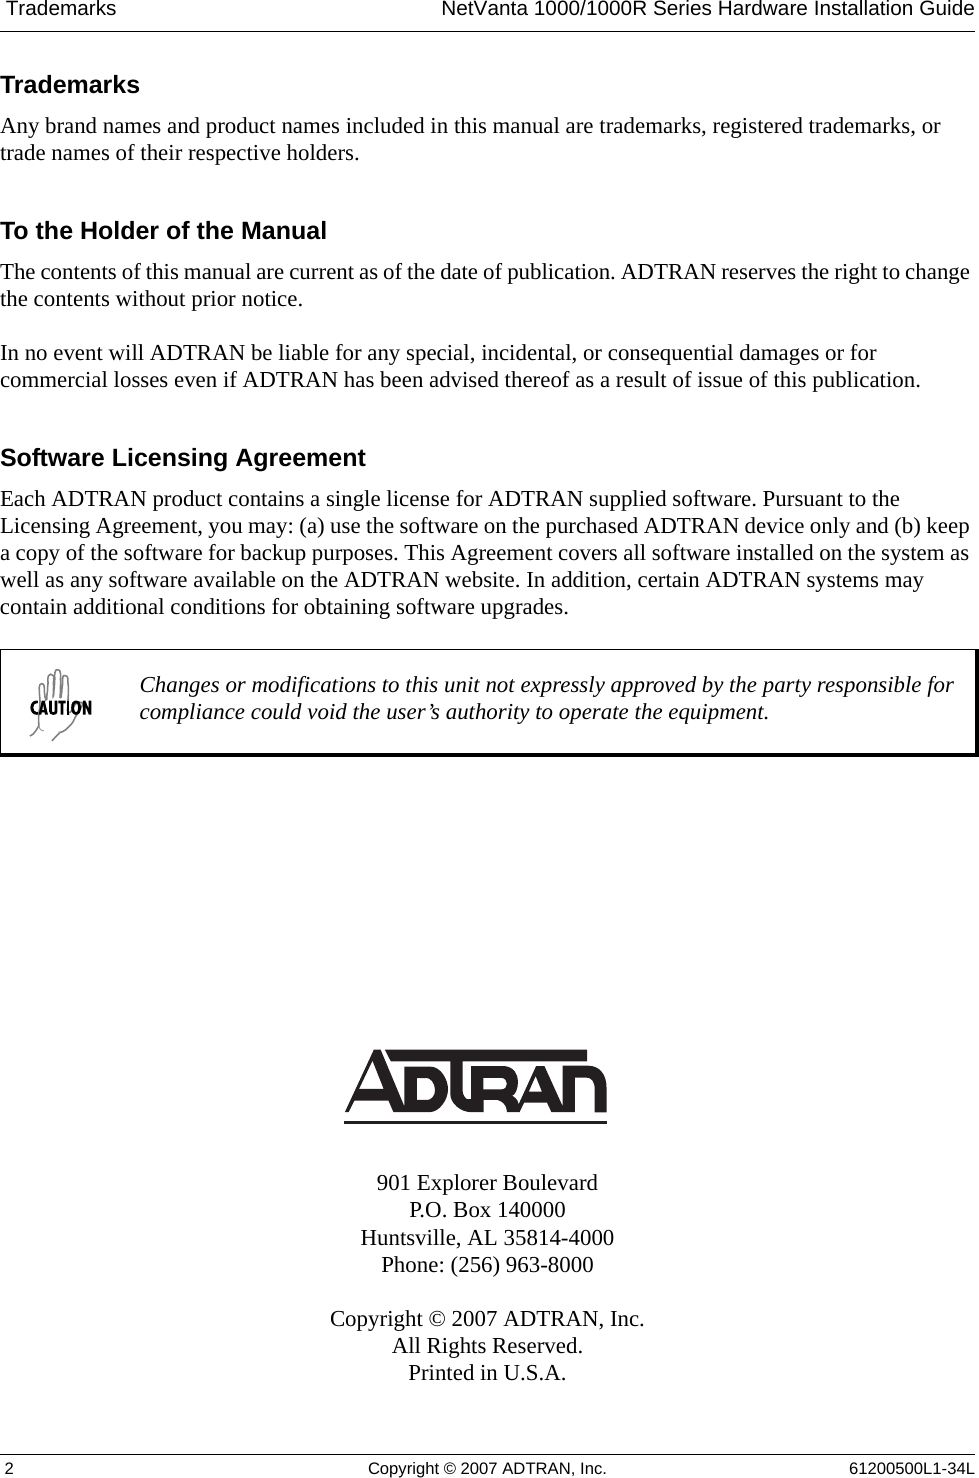  Trademarks NetVanta 1000/1000R Series Hardware Installation Guide 2 Copyright © 2007 ADTRAN, Inc. 61200500L1-34LTrademarksAny brand names and product names included in this manual are trademarks, registered trademarks, or trade names of their respective holders.To the Holder of the ManualThe contents of this manual are current as of the date of publication. ADTRAN reserves the right to change the contents without prior notice.In no event will ADTRAN be liable for any special, incidental, or consequential damages or for commercial losses even if ADTRAN has been advised thereof as a result of issue of this publication.Software Licensing AgreementEach ADTRAN product contains a single license for ADTRAN supplied software. Pursuant to the Licensing Agreement, you may: (a) use the software on the purchased ADTRAN device only and (b) keep a copy of the software for backup purposes. This Agreement covers all software installed on the system as well as any software available on the ADTRAN website. In addition, certain ADTRAN systems may contain additional conditions for obtaining software upgrades. 901 Explorer BoulevardP.O. Box 140000Huntsville, AL 35814-4000Phone: (256) 963-8000Copyright © 2007 ADTRAN, Inc.All Rights Reserved.Printed in U.S.A.Changes or modifications to this unit not expressly approved by the party responsible for compliance could void the user’s authority to operate the equipment.